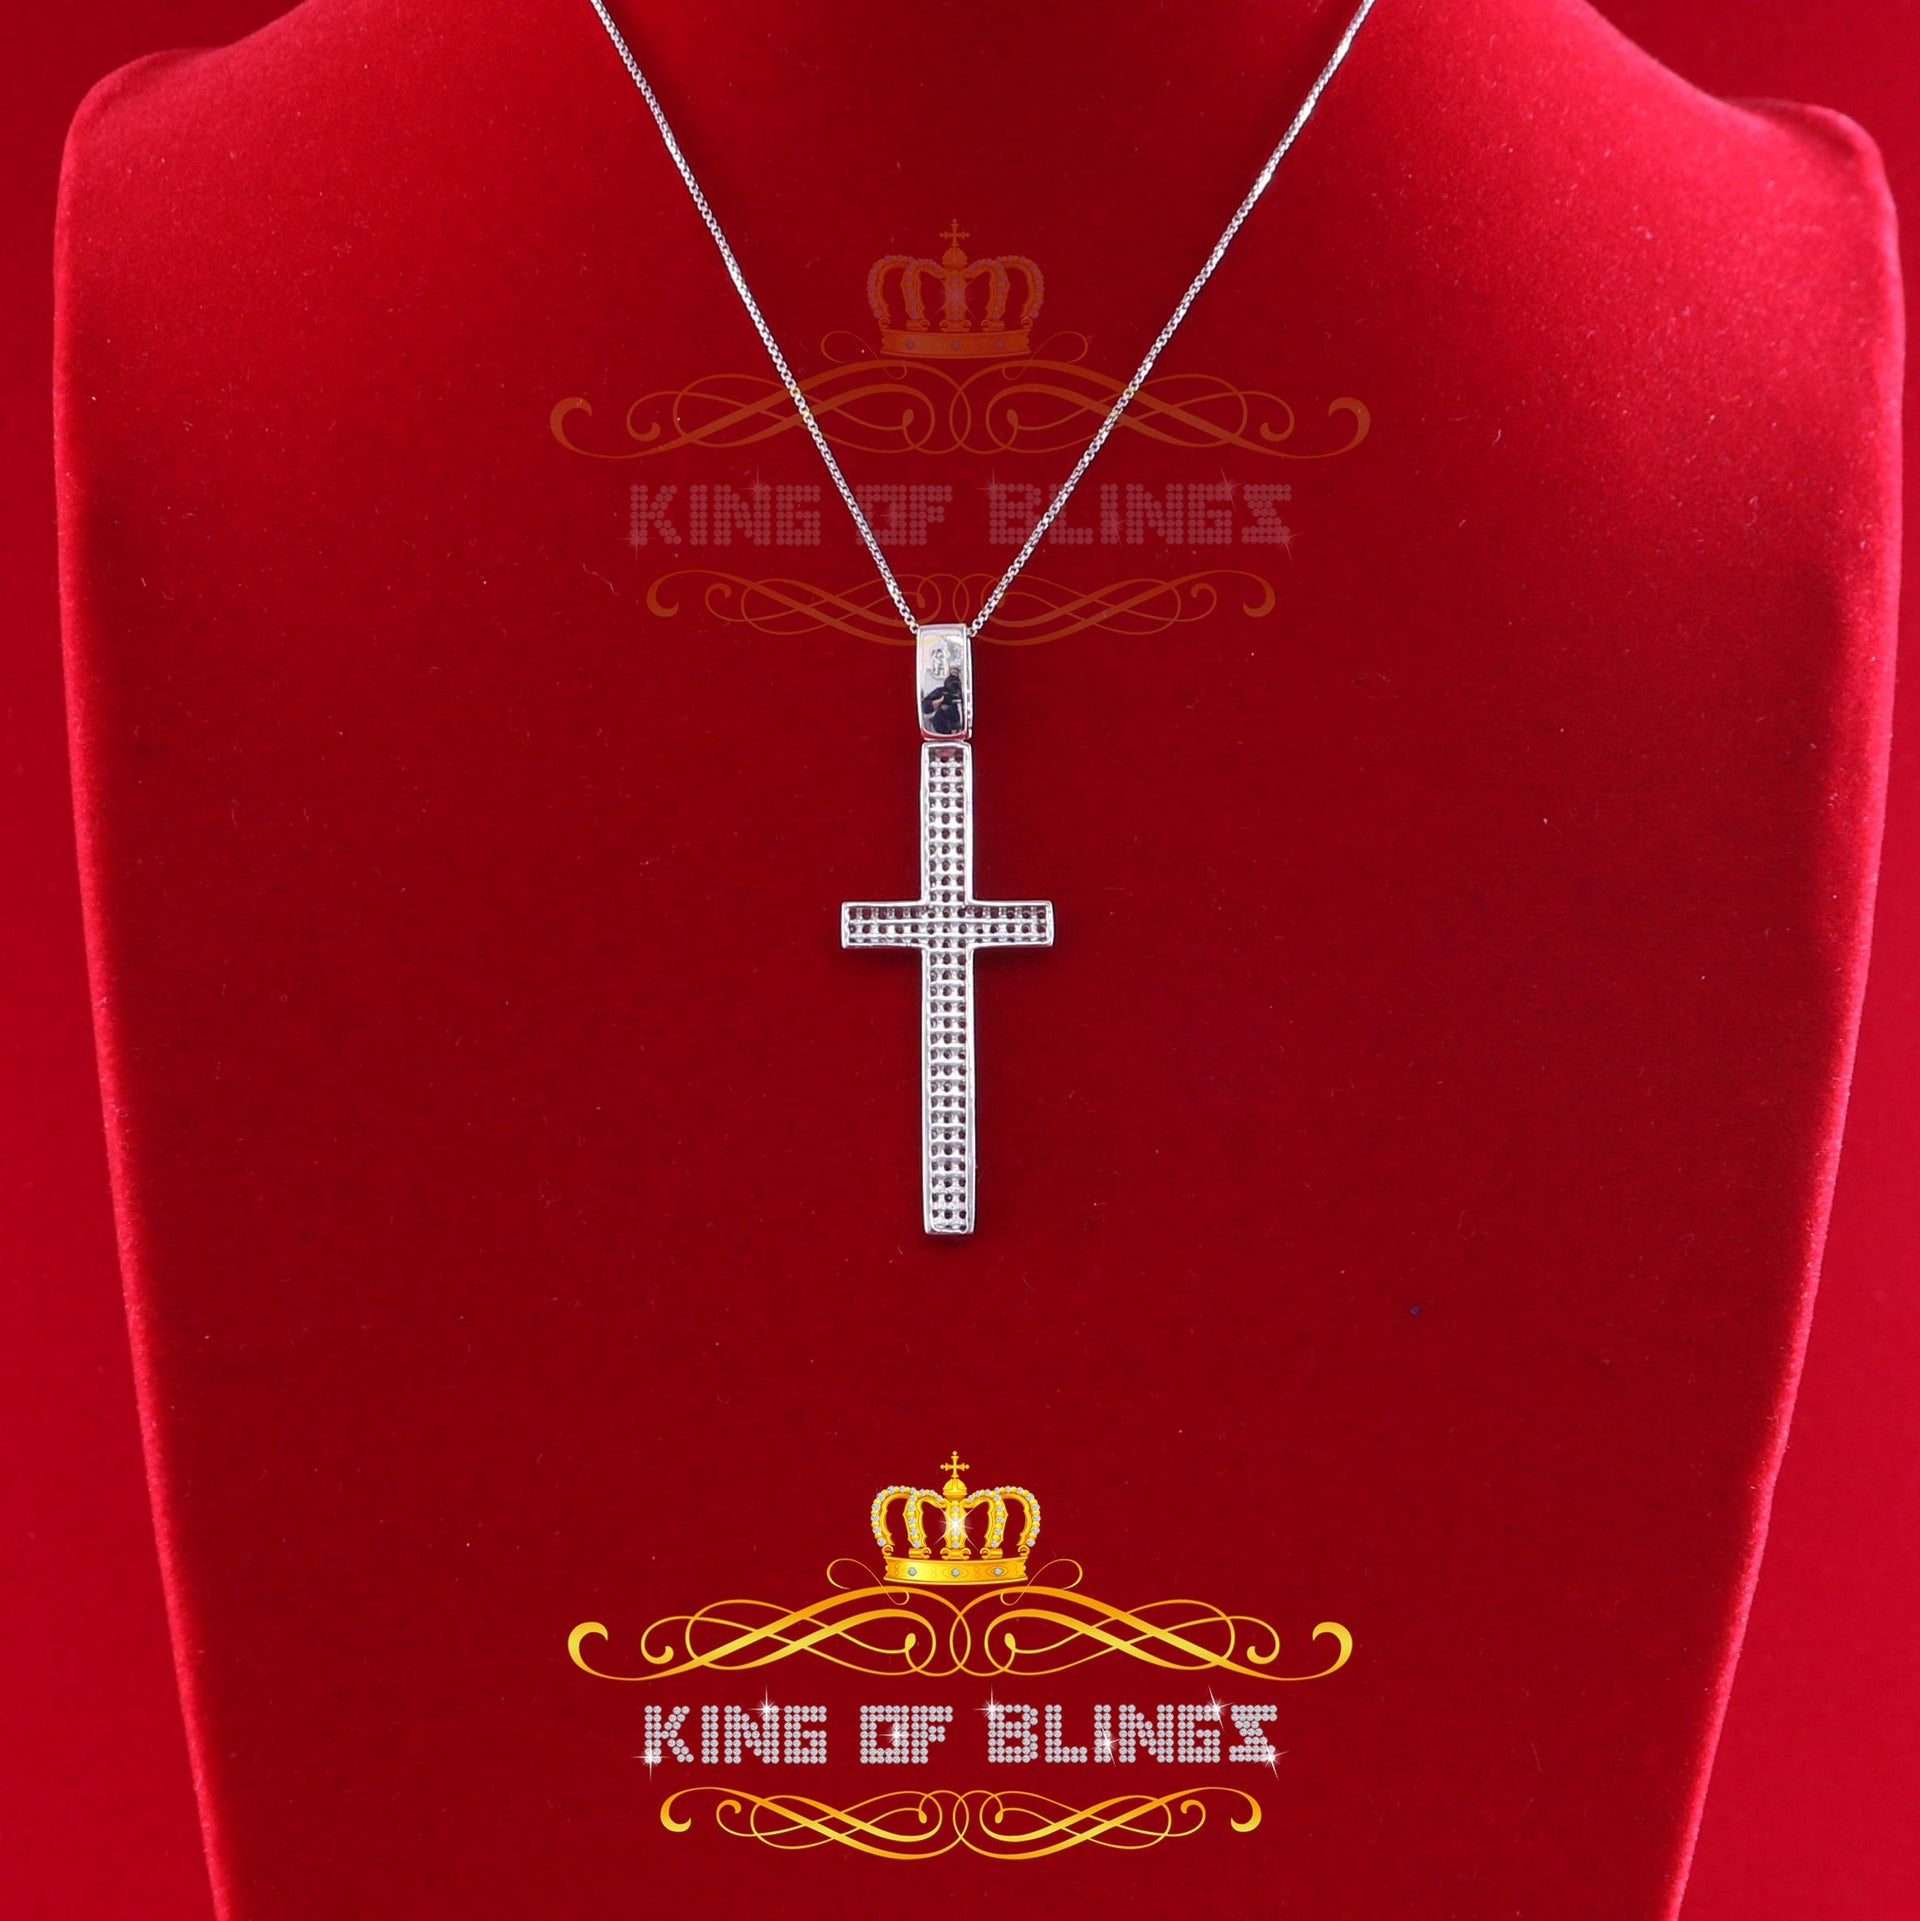 Attractive Fancy 925 Sterling White Silver CROSS Pendant 1.41ct Cubic Zirconia KING OF BLINGS